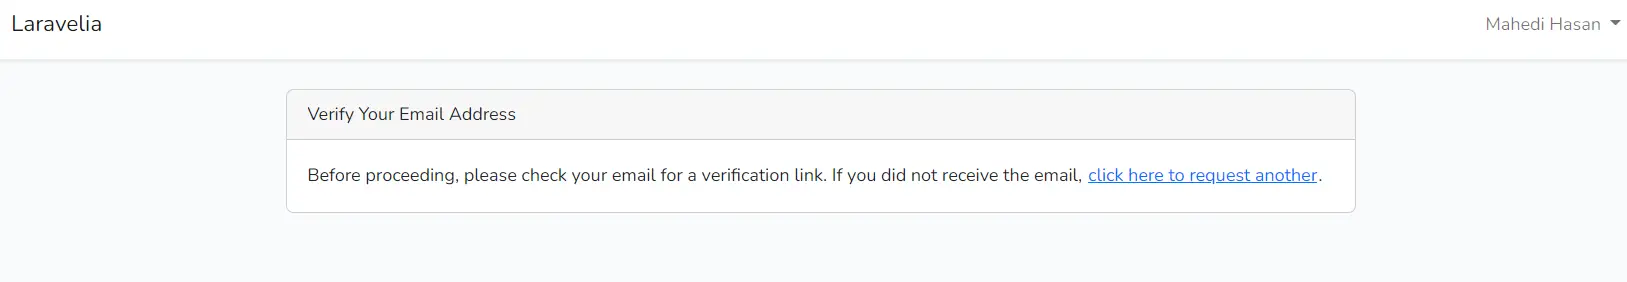 email-verification-page